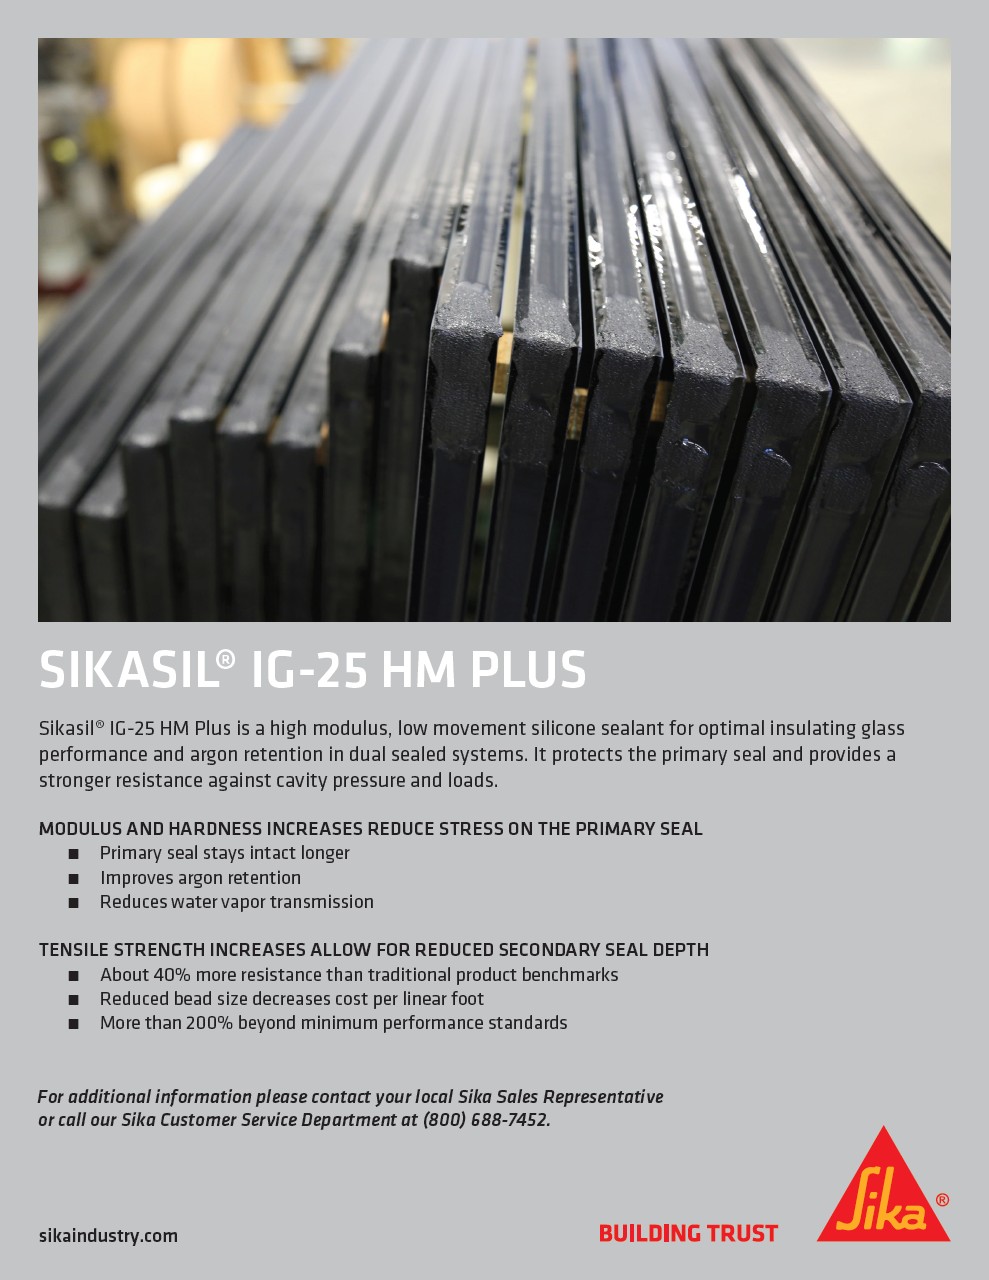 Sikasil IG-25 HM Plus Product Flyer